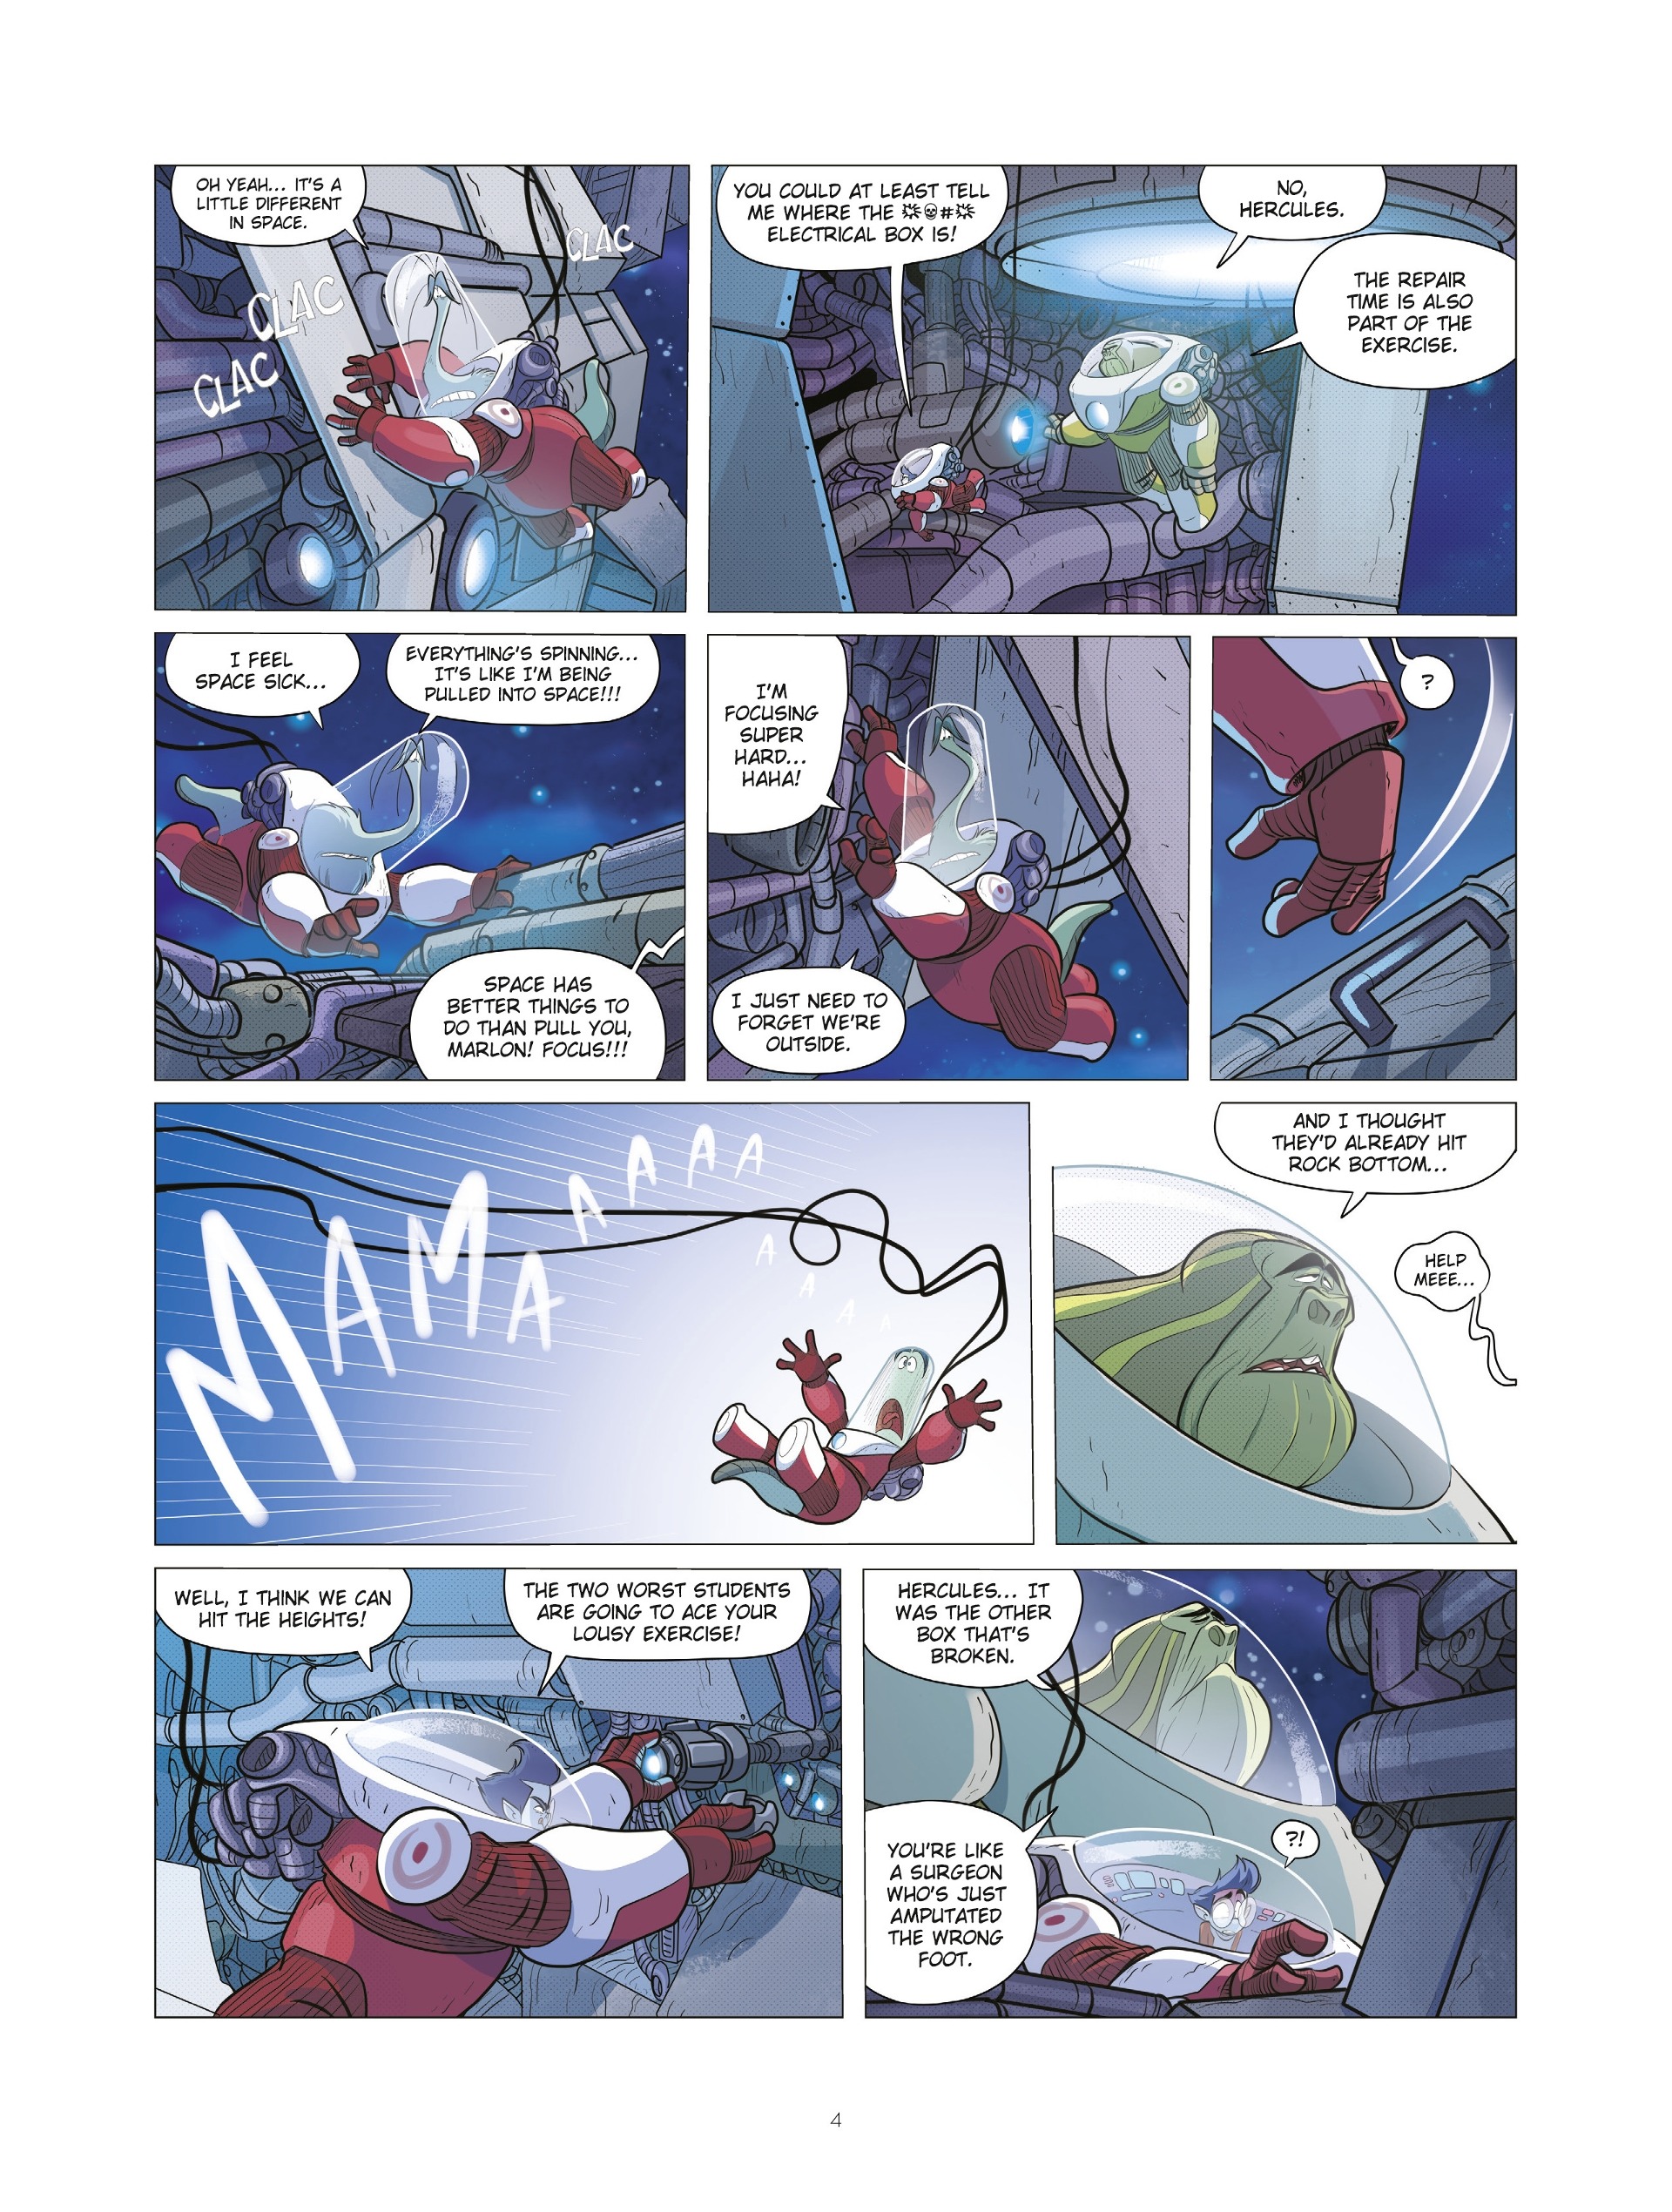 Hercules Intergalactic Agent (2019-): Chapter 3 - Page 4